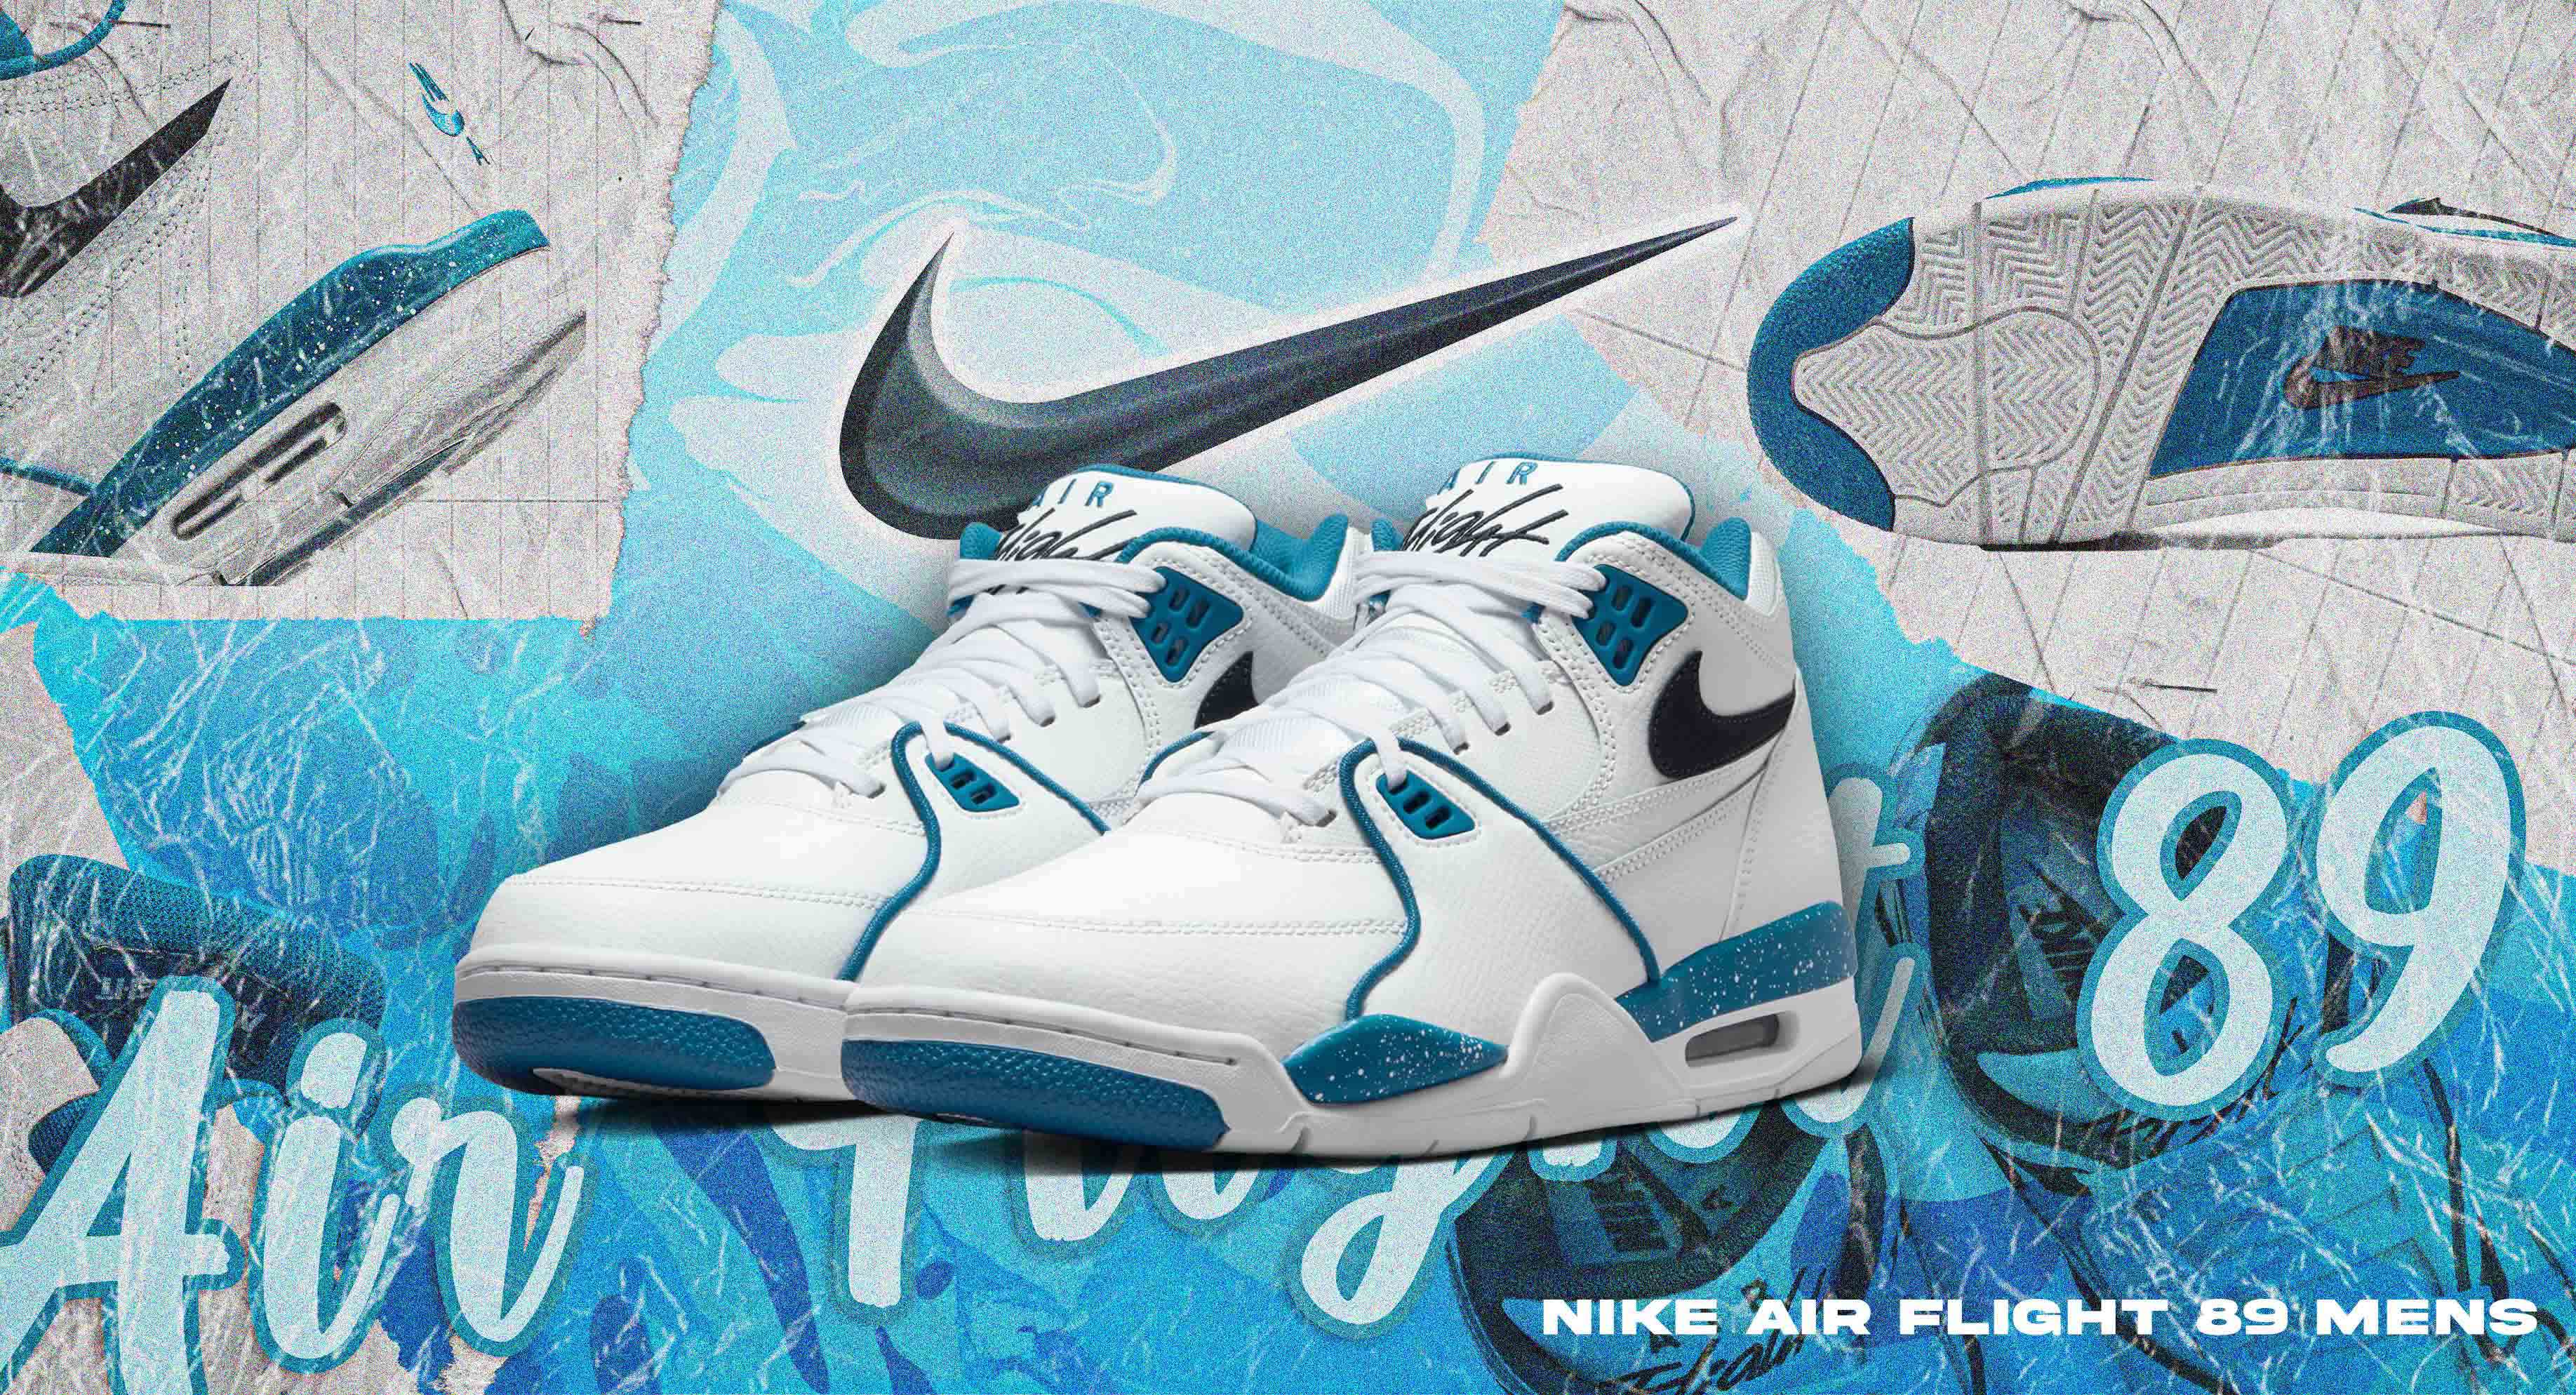 Lace Up and Take Flight In Side Step's Nike Air Flight Range!